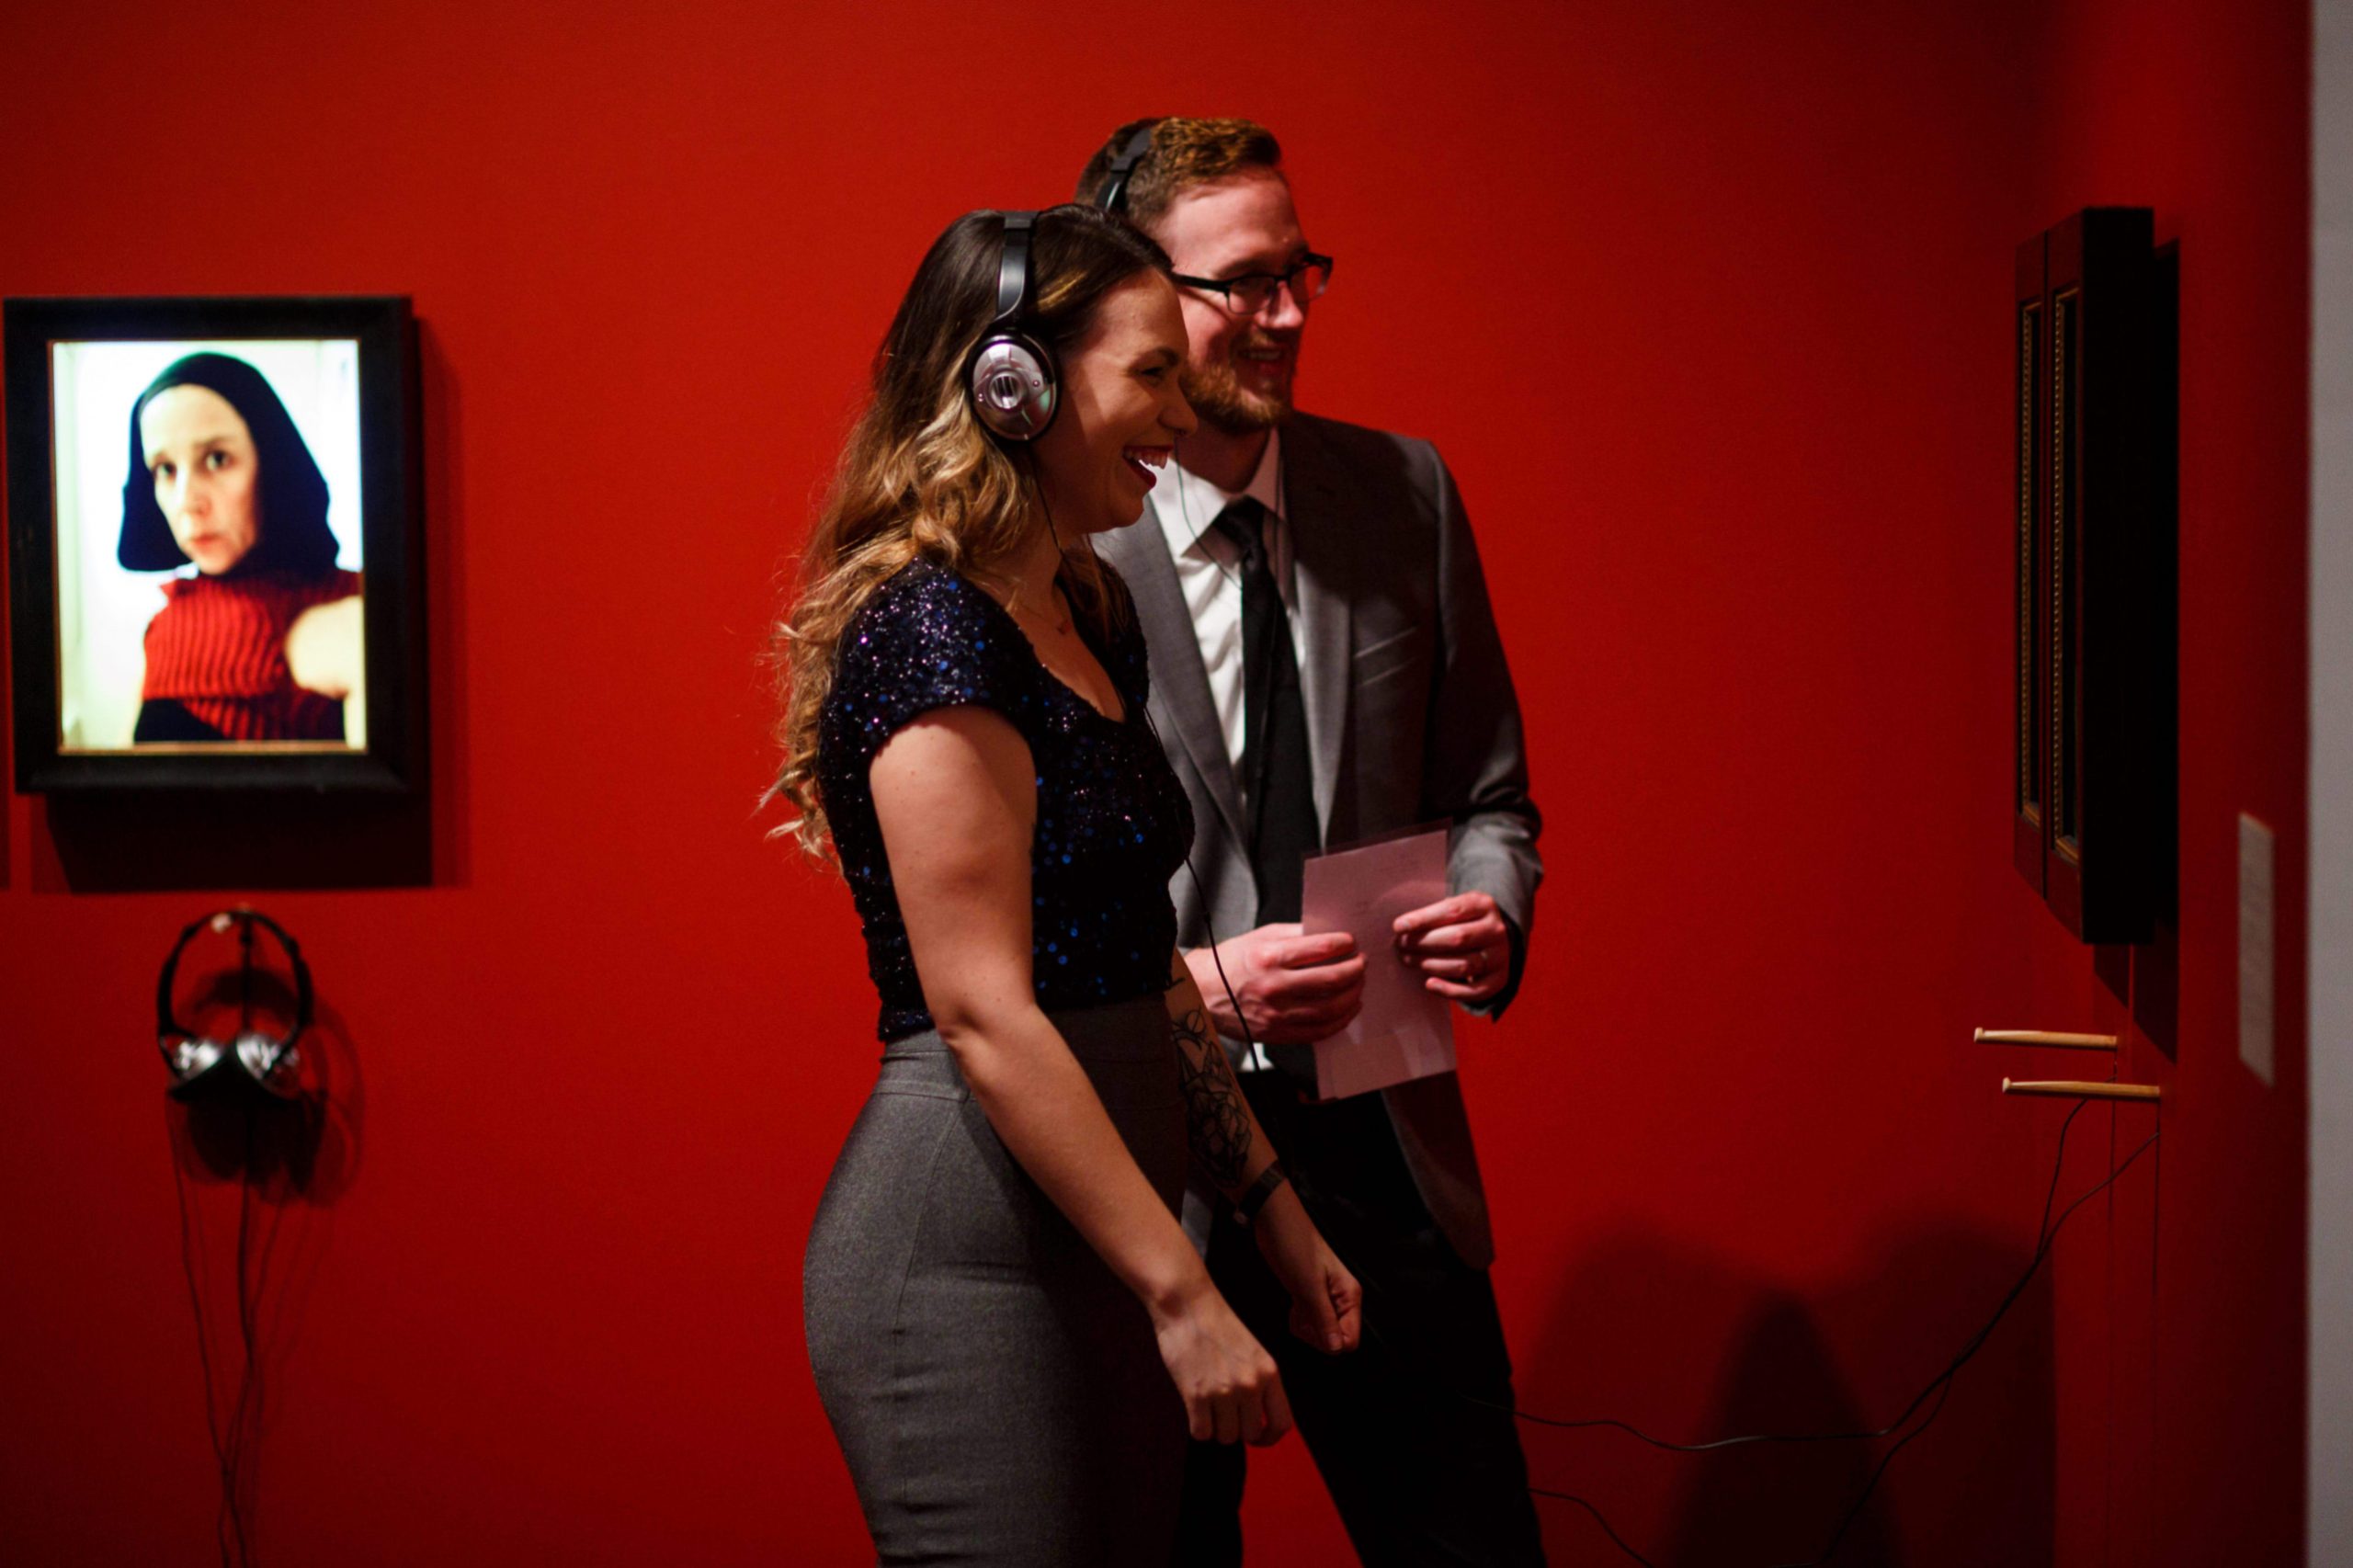 a cocktail attired couple listen to a nina katchadourian video through headphones and smile. The room is dark red and a still image of nina is present in the background.